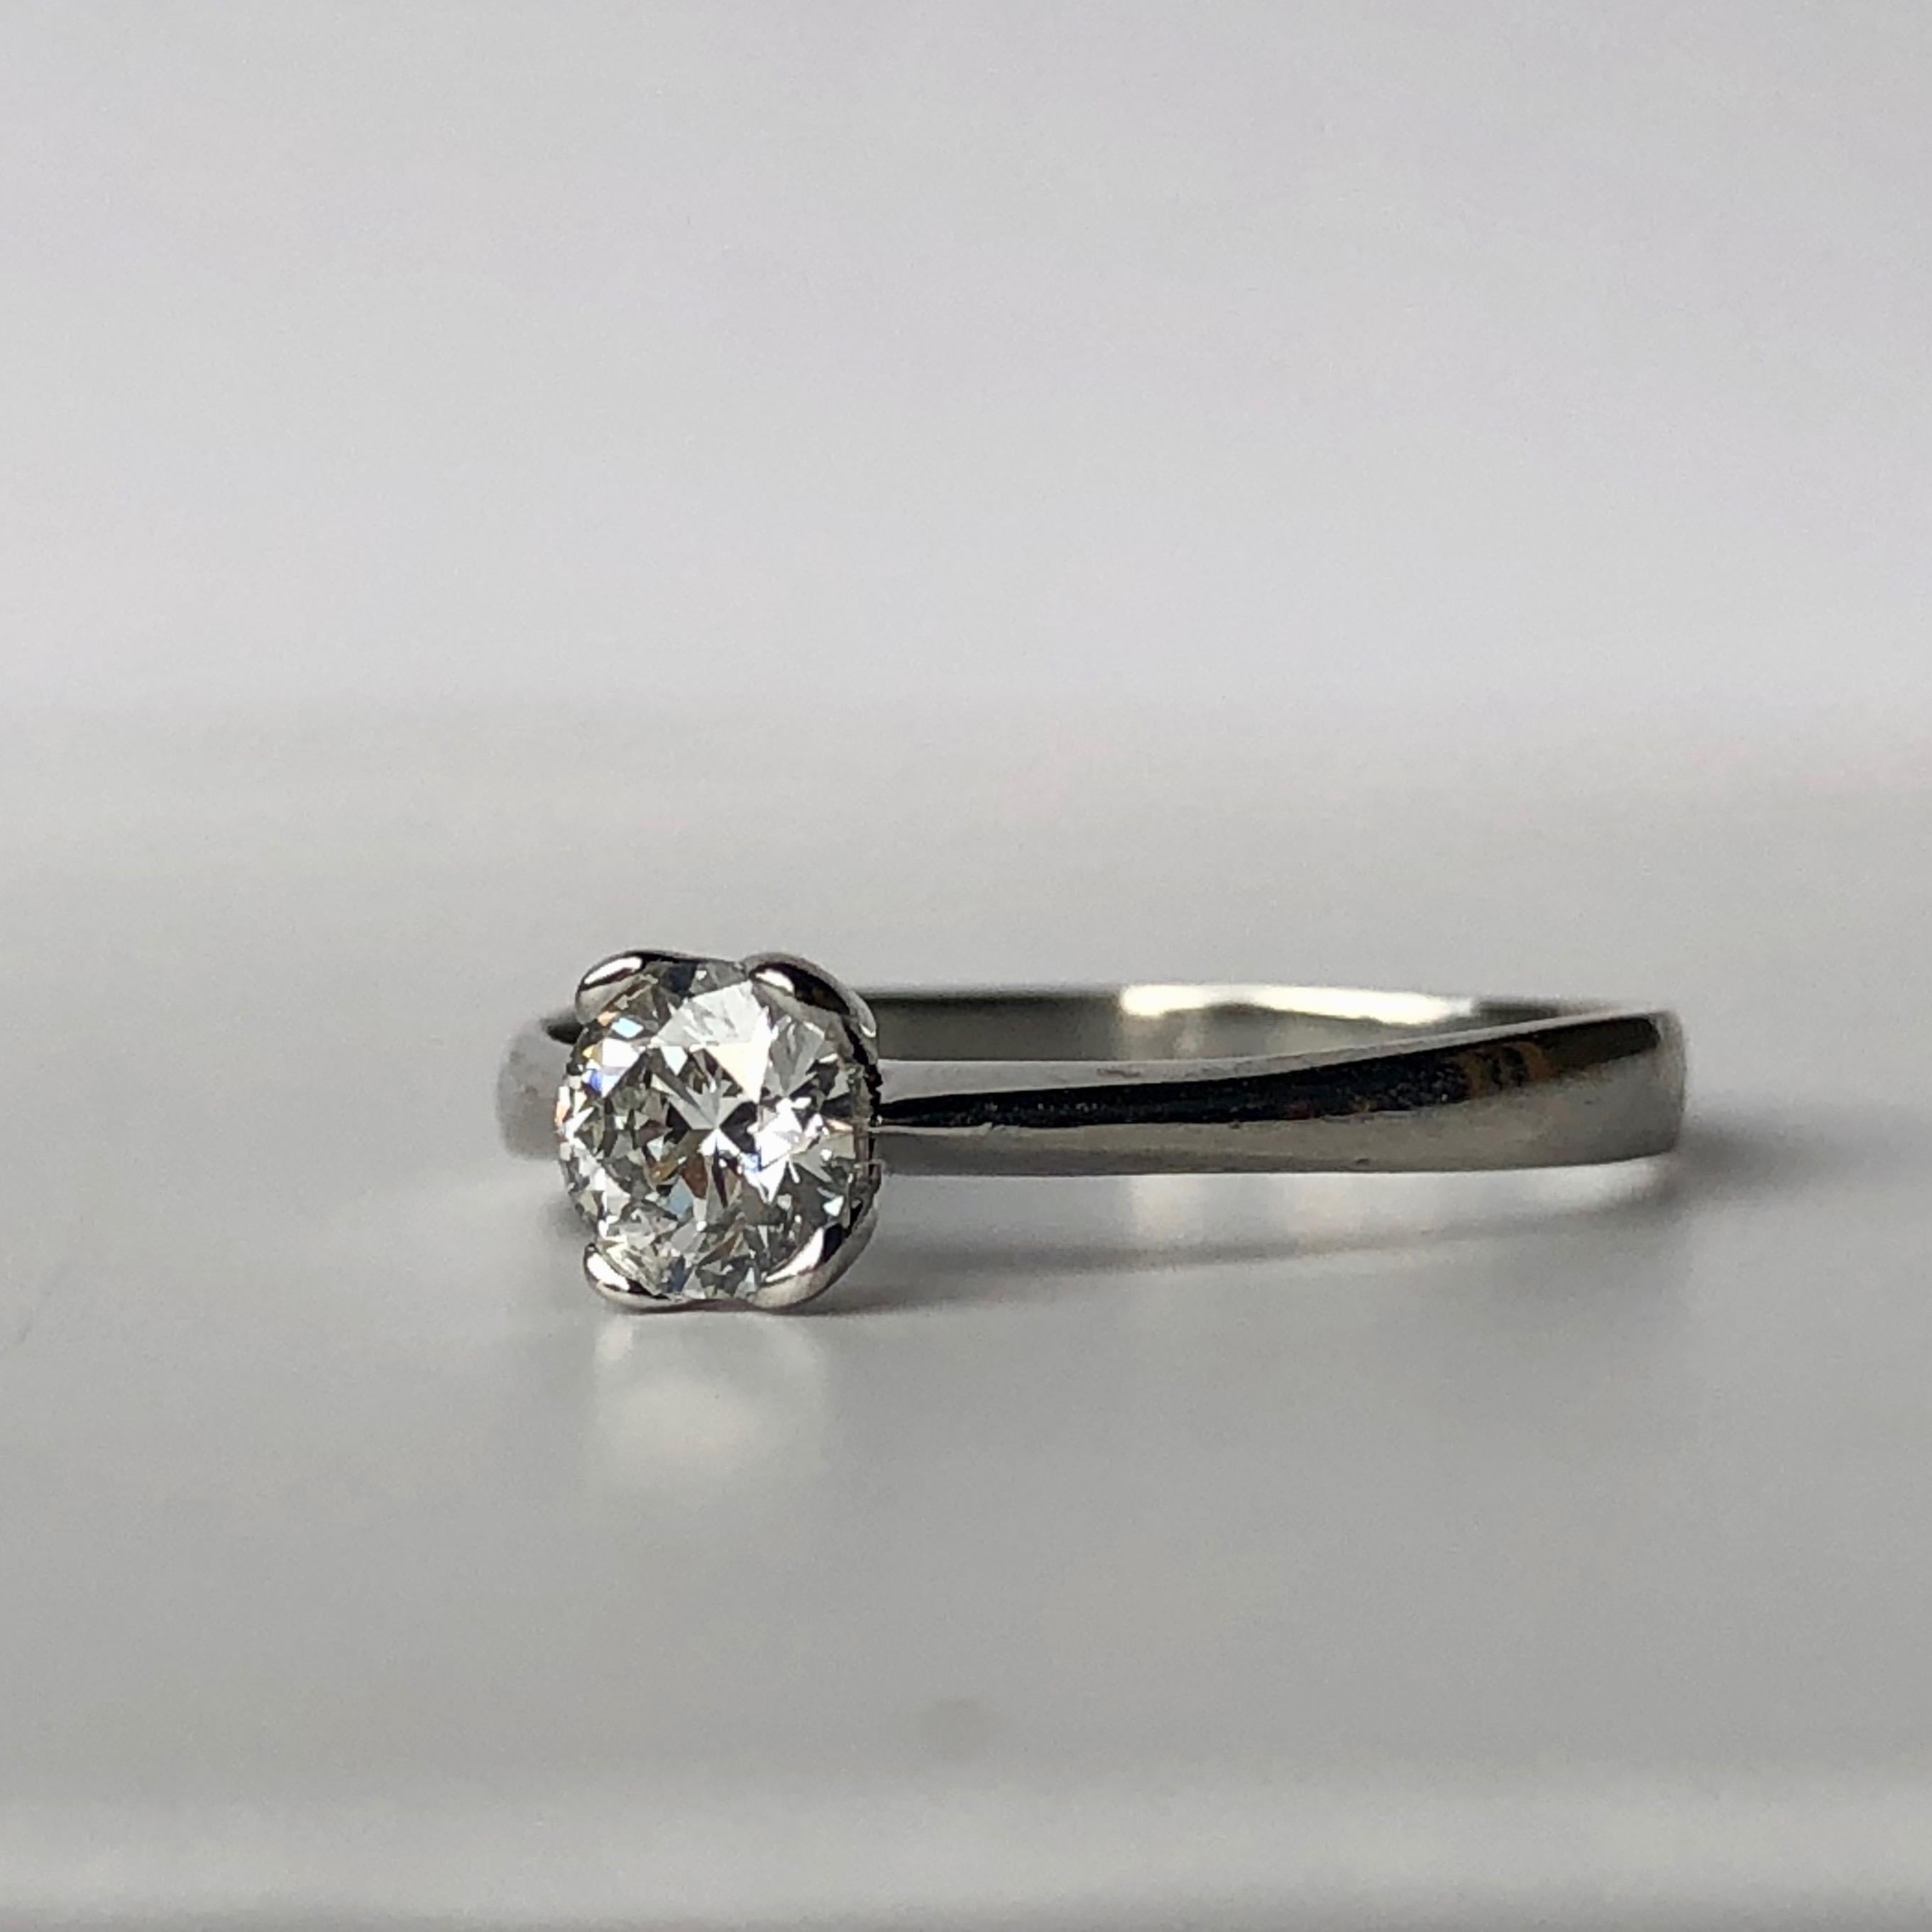 White Diamond Solitaire Engagement Ring 18k White Gold

.33ct G Colour VS Clarity

Size M Can Be Sized To Your Required Ring Size Within 48 Hours By Our In House Team

We love the claw detail on this solitaire - very unusual 

We accept returns 
You